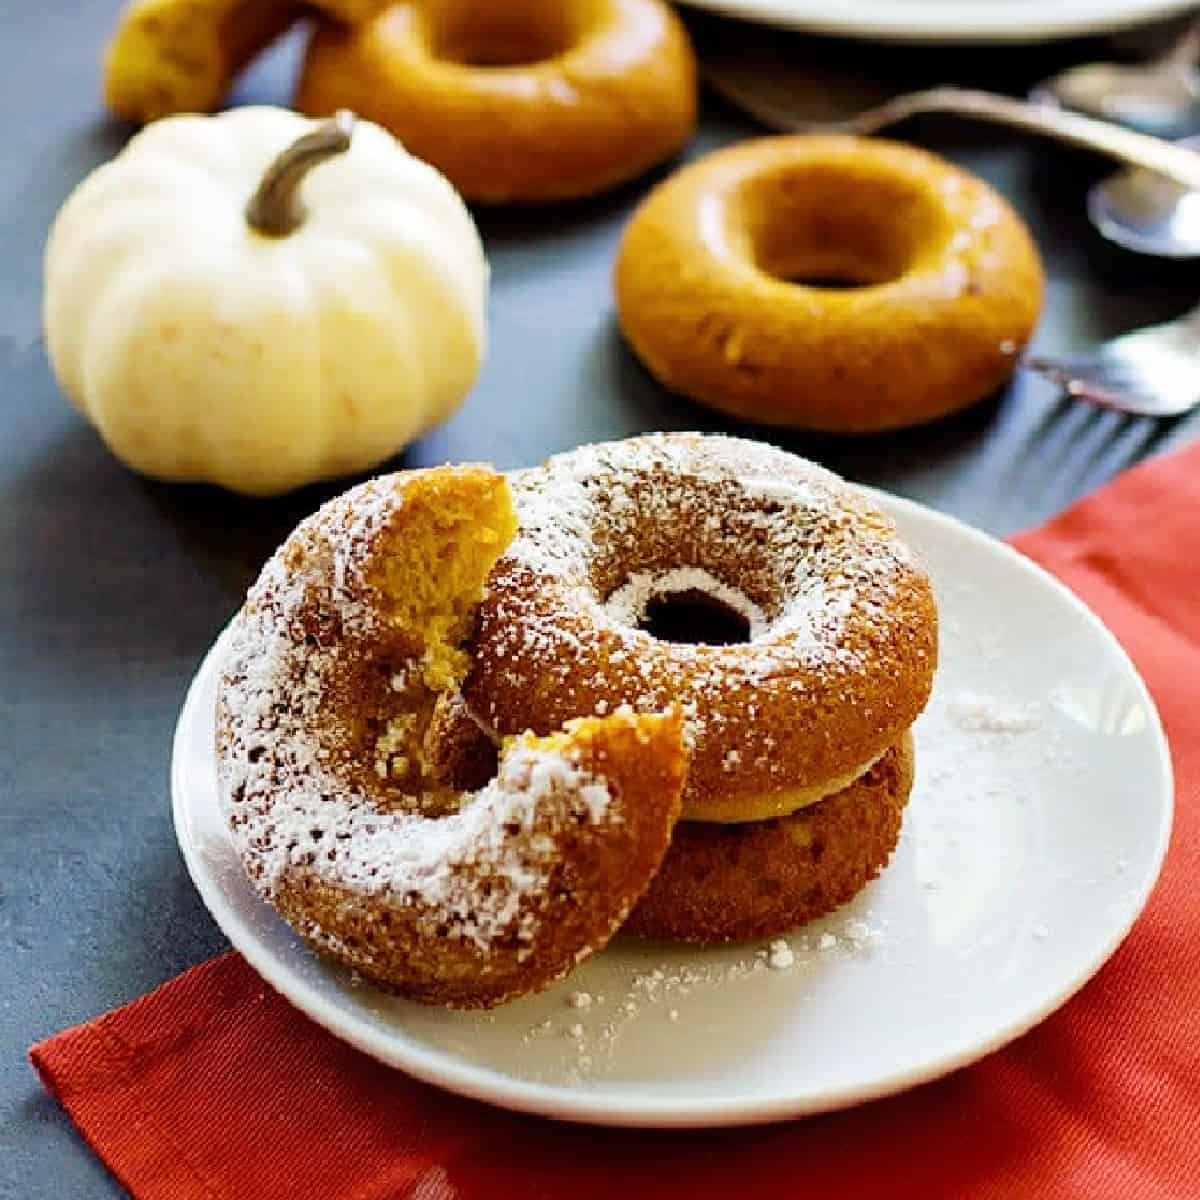 Baked Pumpkin Donuts are so simple and can be made in less than an hour using basic ingredients that are already in your pantry.
